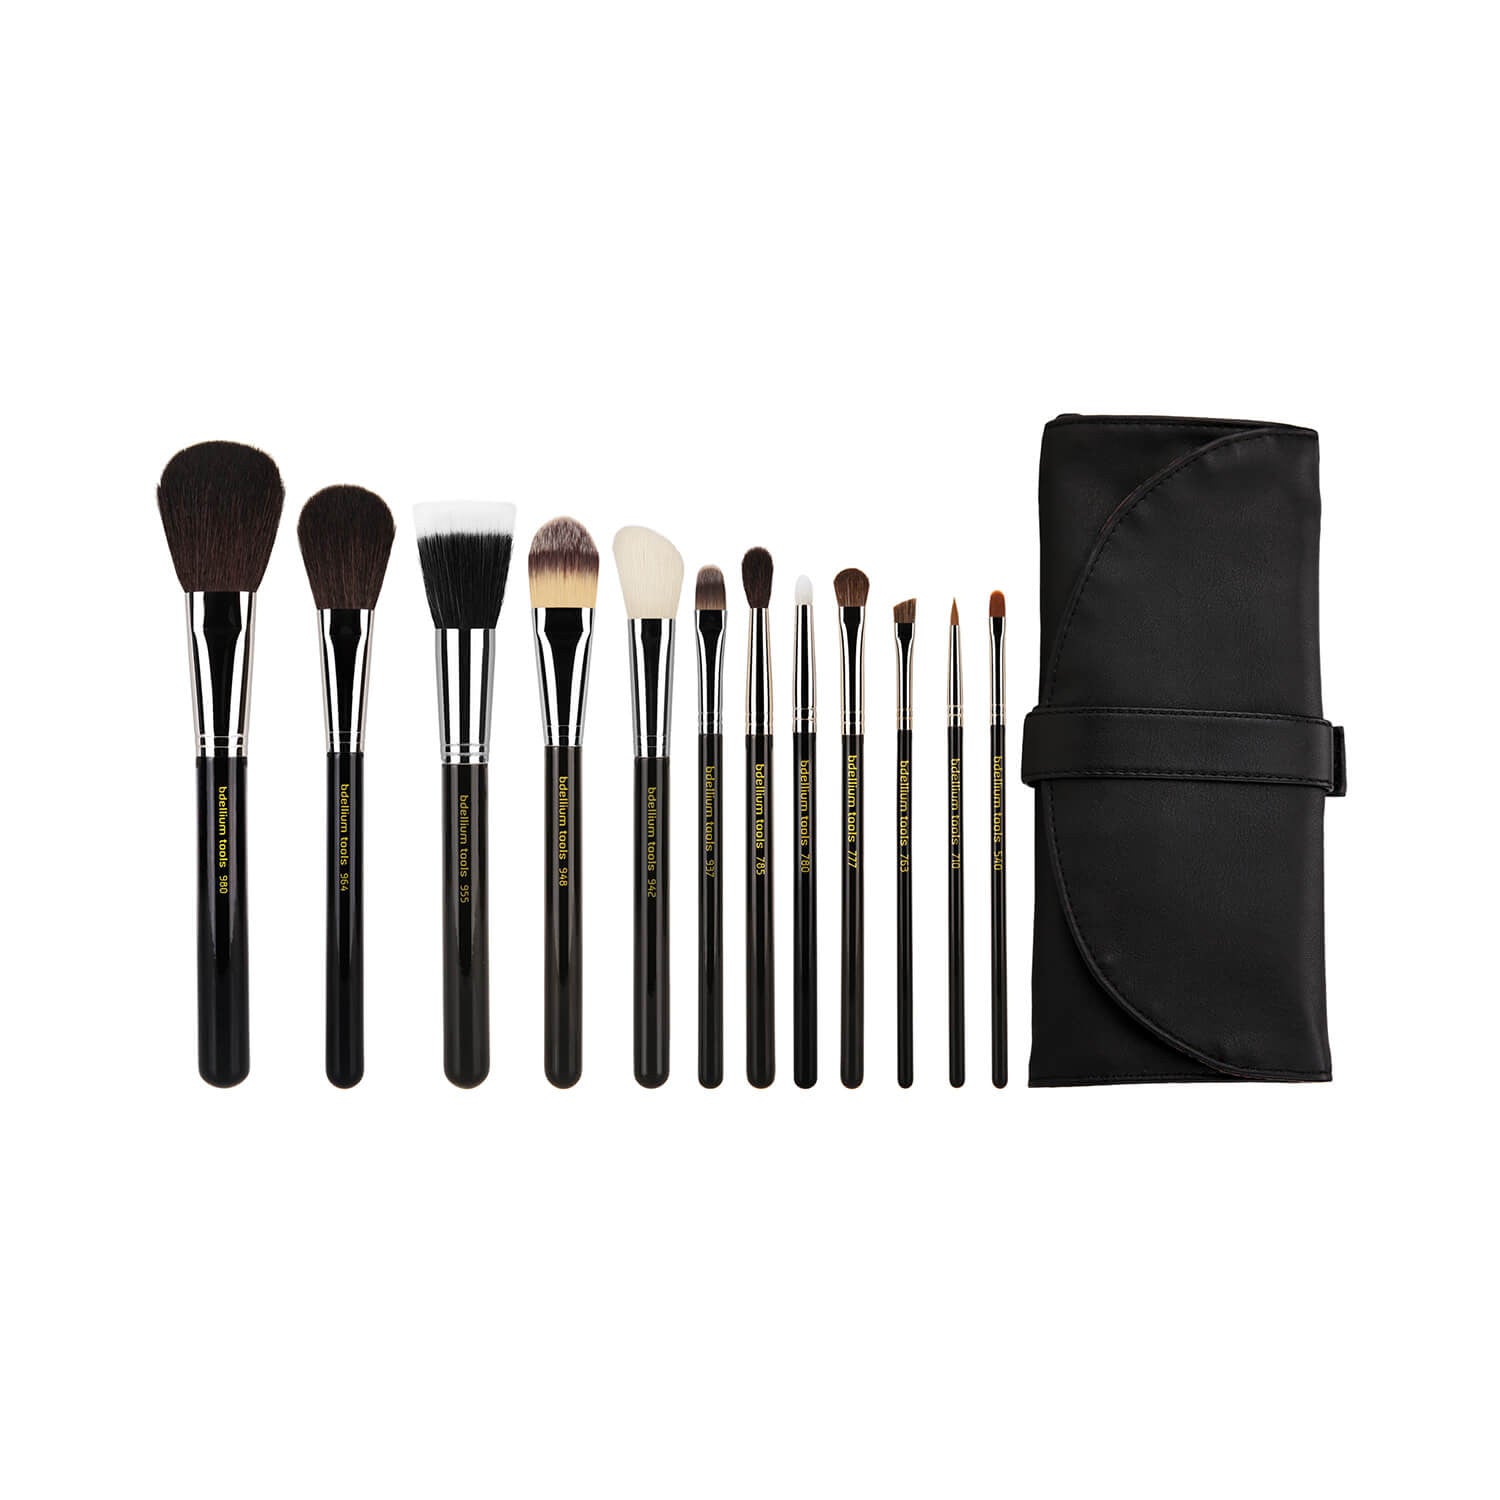 BDellium Tools Maestro Complete 12pc Brush Set with Roll-up Pouch